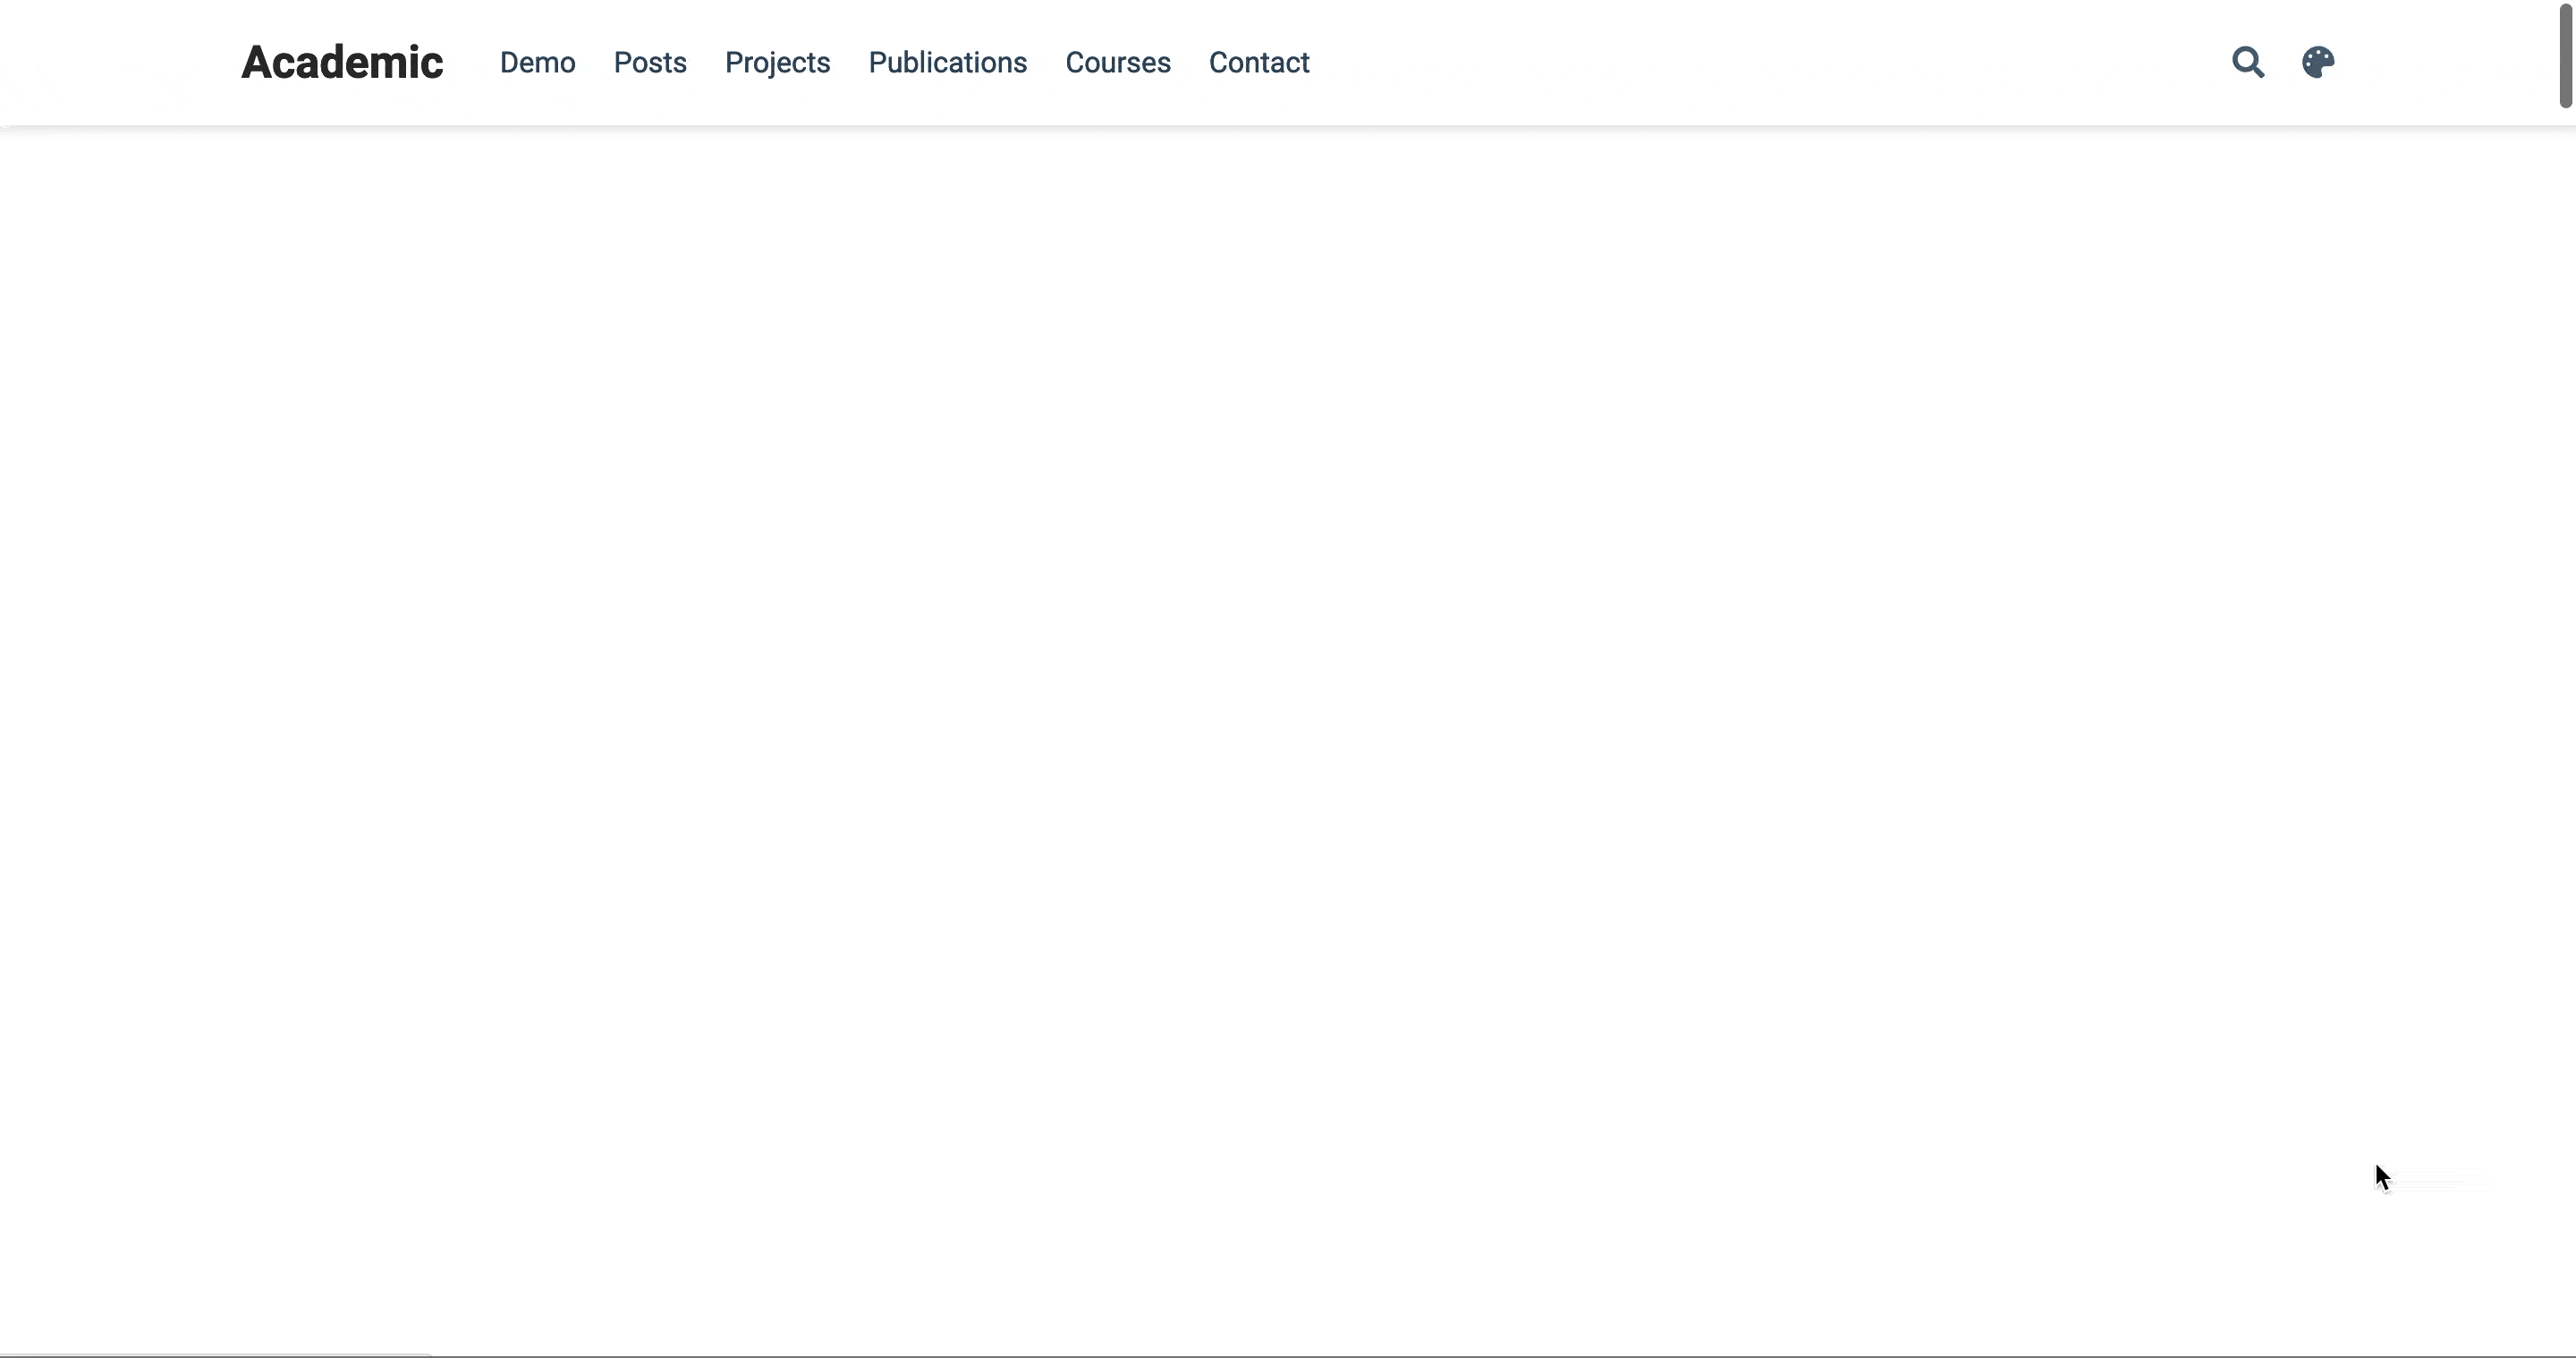 A gif of the content sliding in from the right side of the page